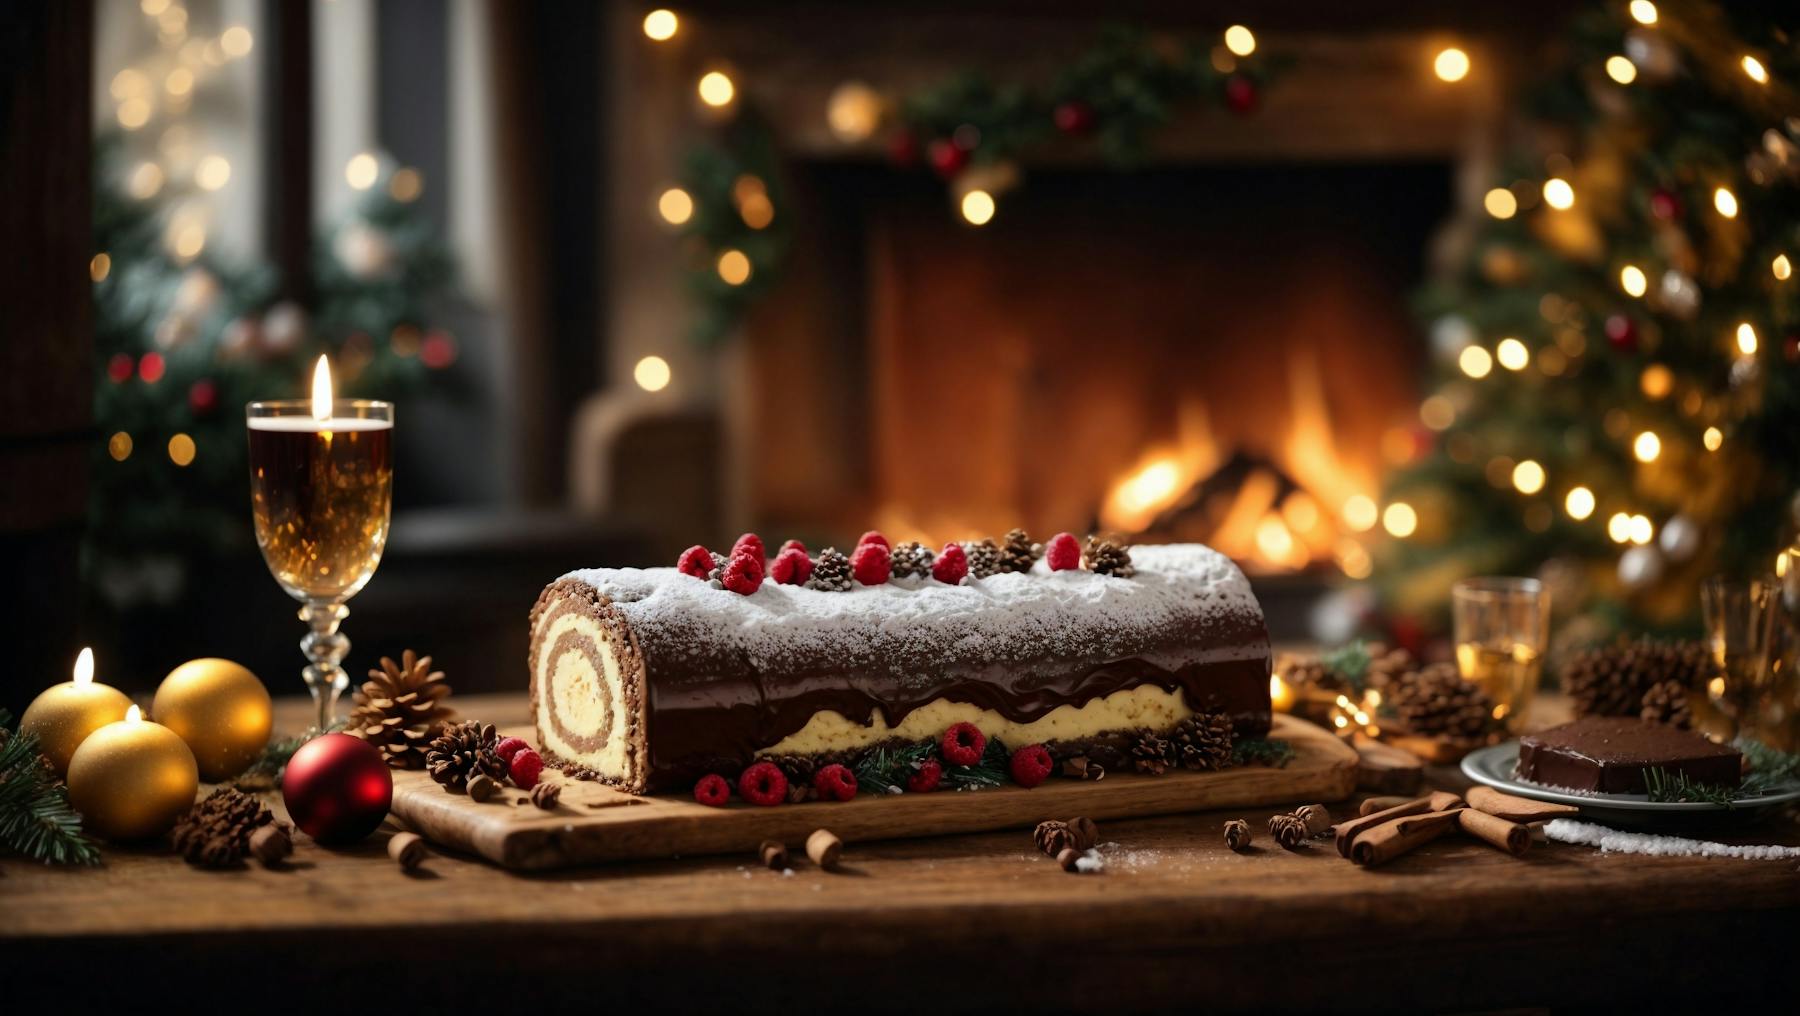 Yule logs and U'wine wine, festive and gourmet symbols. Discover the perfect pairings to round off your family celebrations in style!